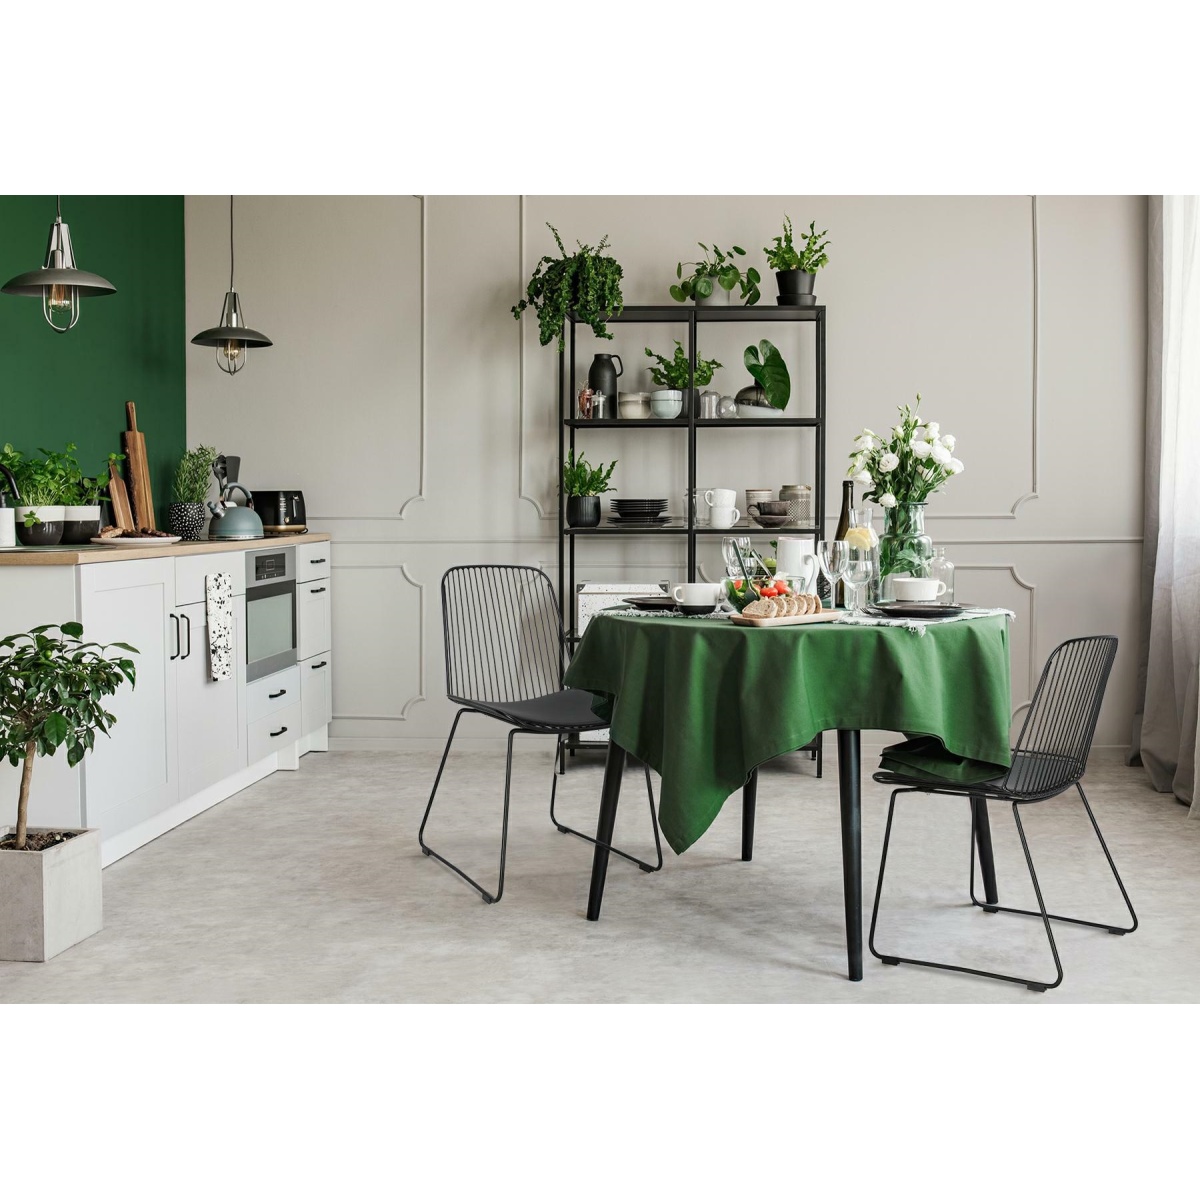 Elegant grey and green kitchen with breakfast on round dining room table